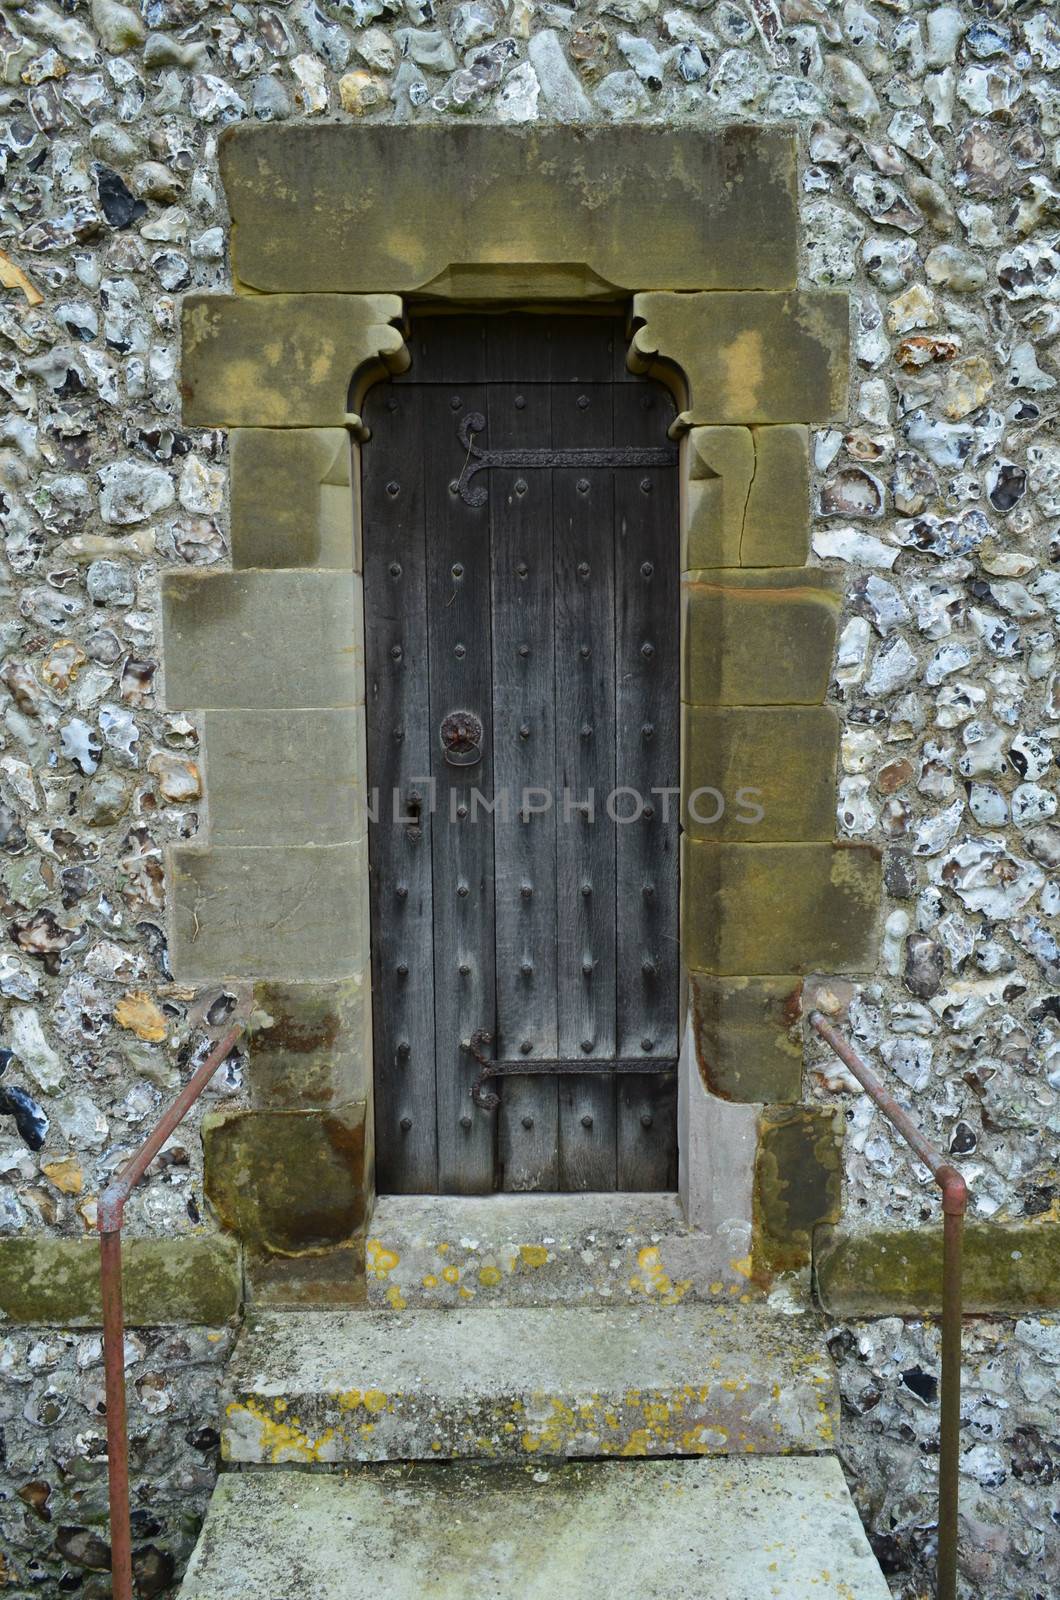 Narrow solid oak door on the church of St Margaret's in the small historic village of Ditchling in the County of Sussex,England.